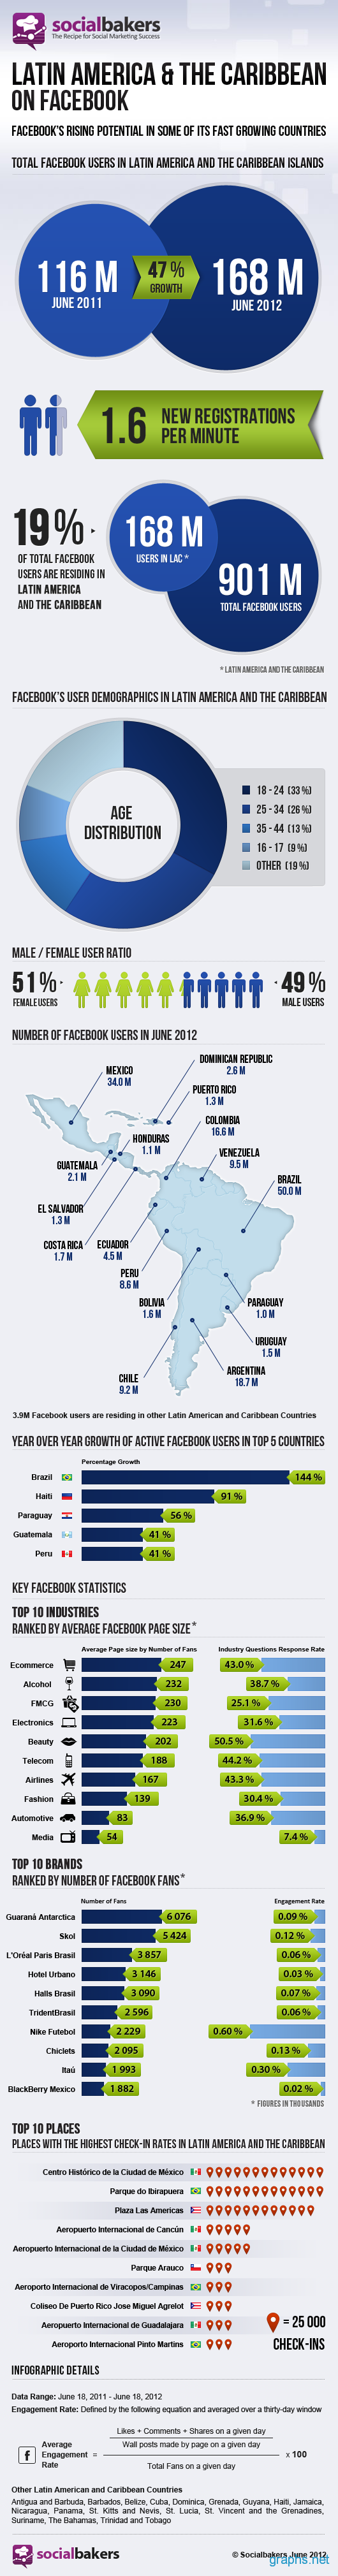 Growth of Facebook in Latin America